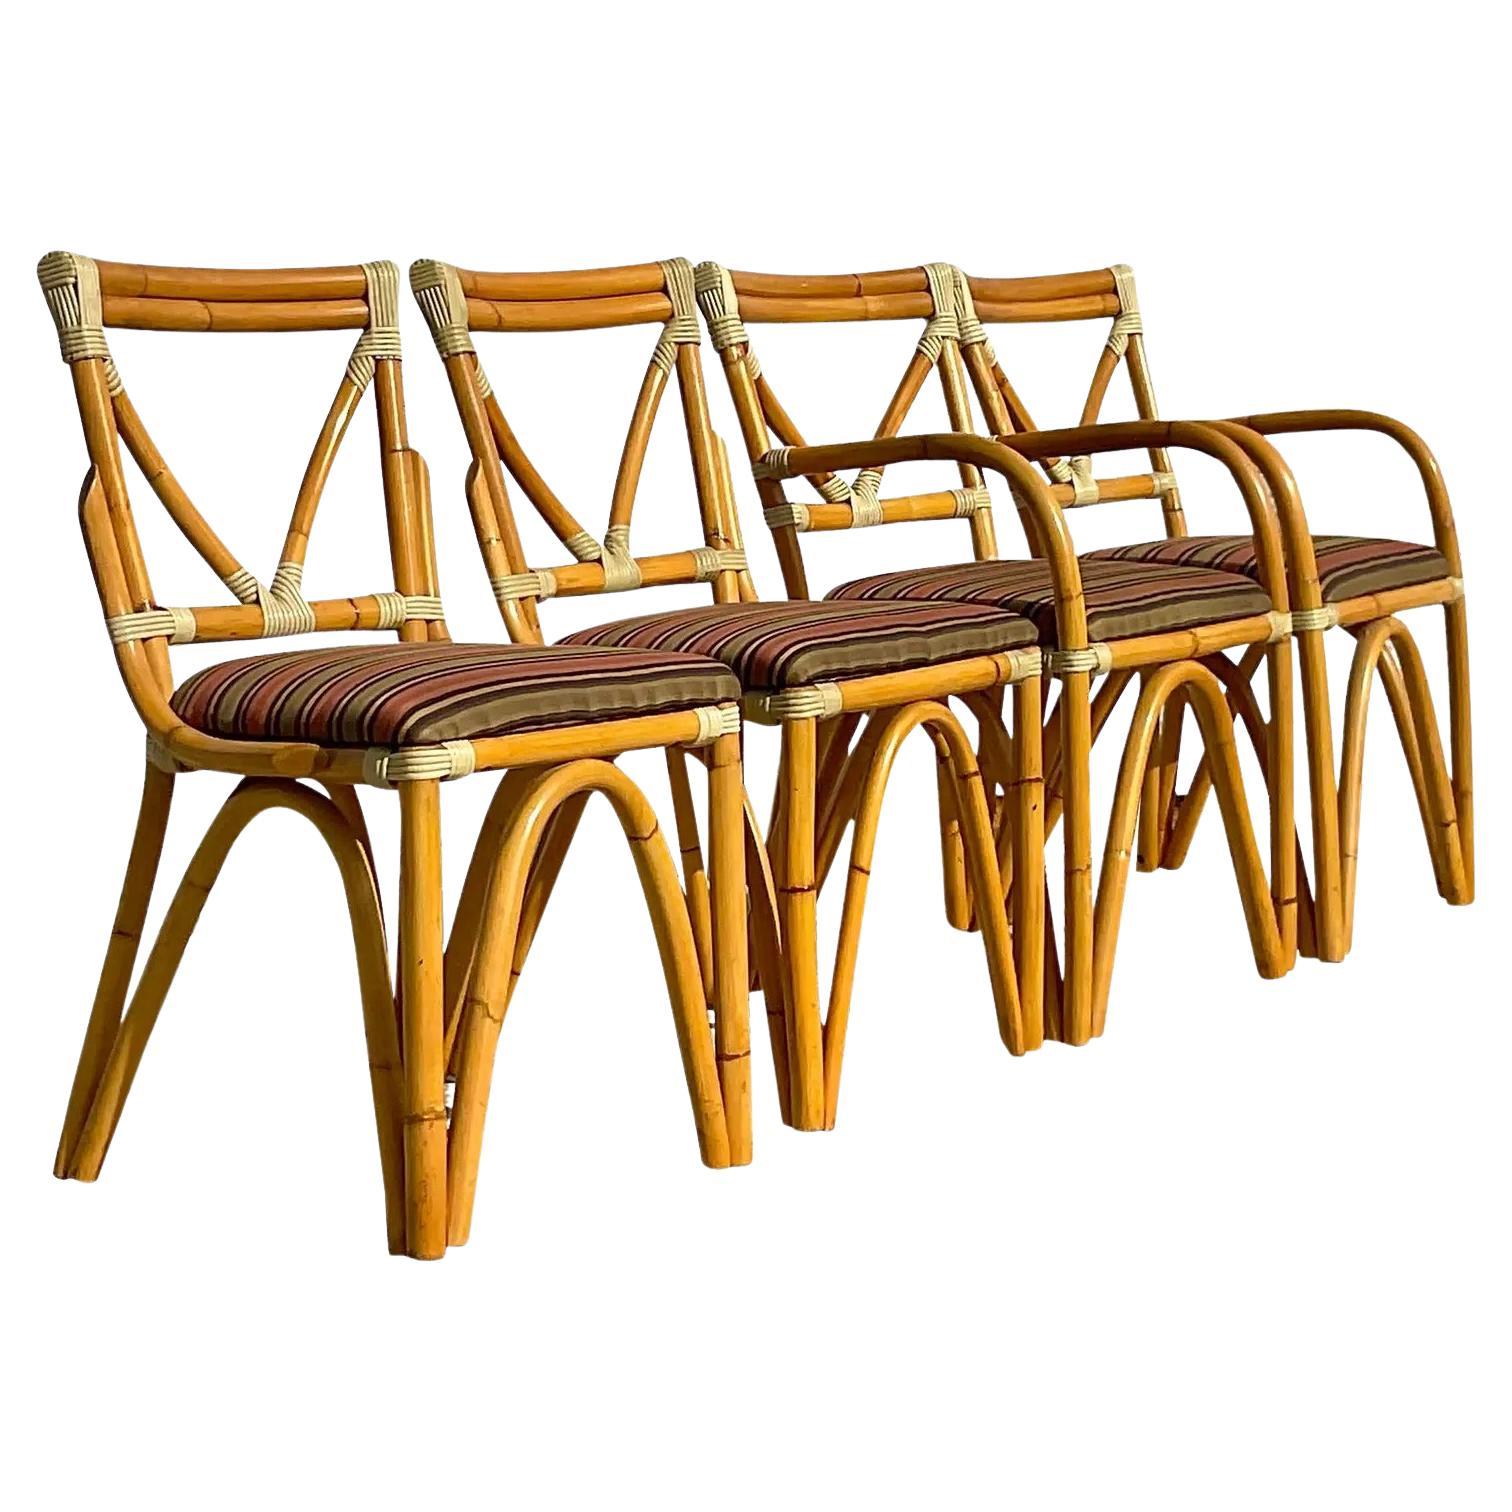 Vintage Coastal Bent Rattan Dining Chairs - Set of Four For Sale